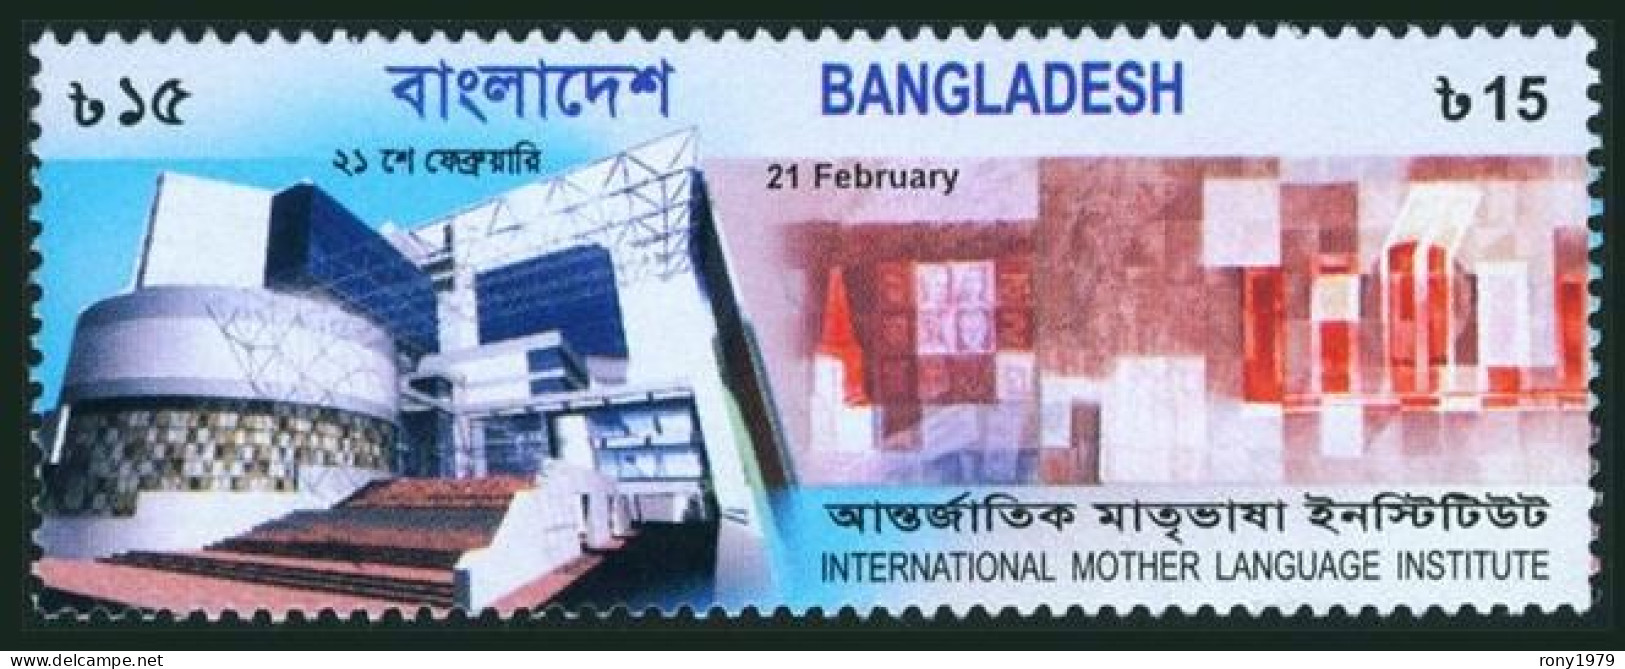 2010 Bangladesh Full Year Set Pack Collection 15 Stamp 8 MS Scout Buddha Cricket Flower Tiger Elephant Bird Women FREE S